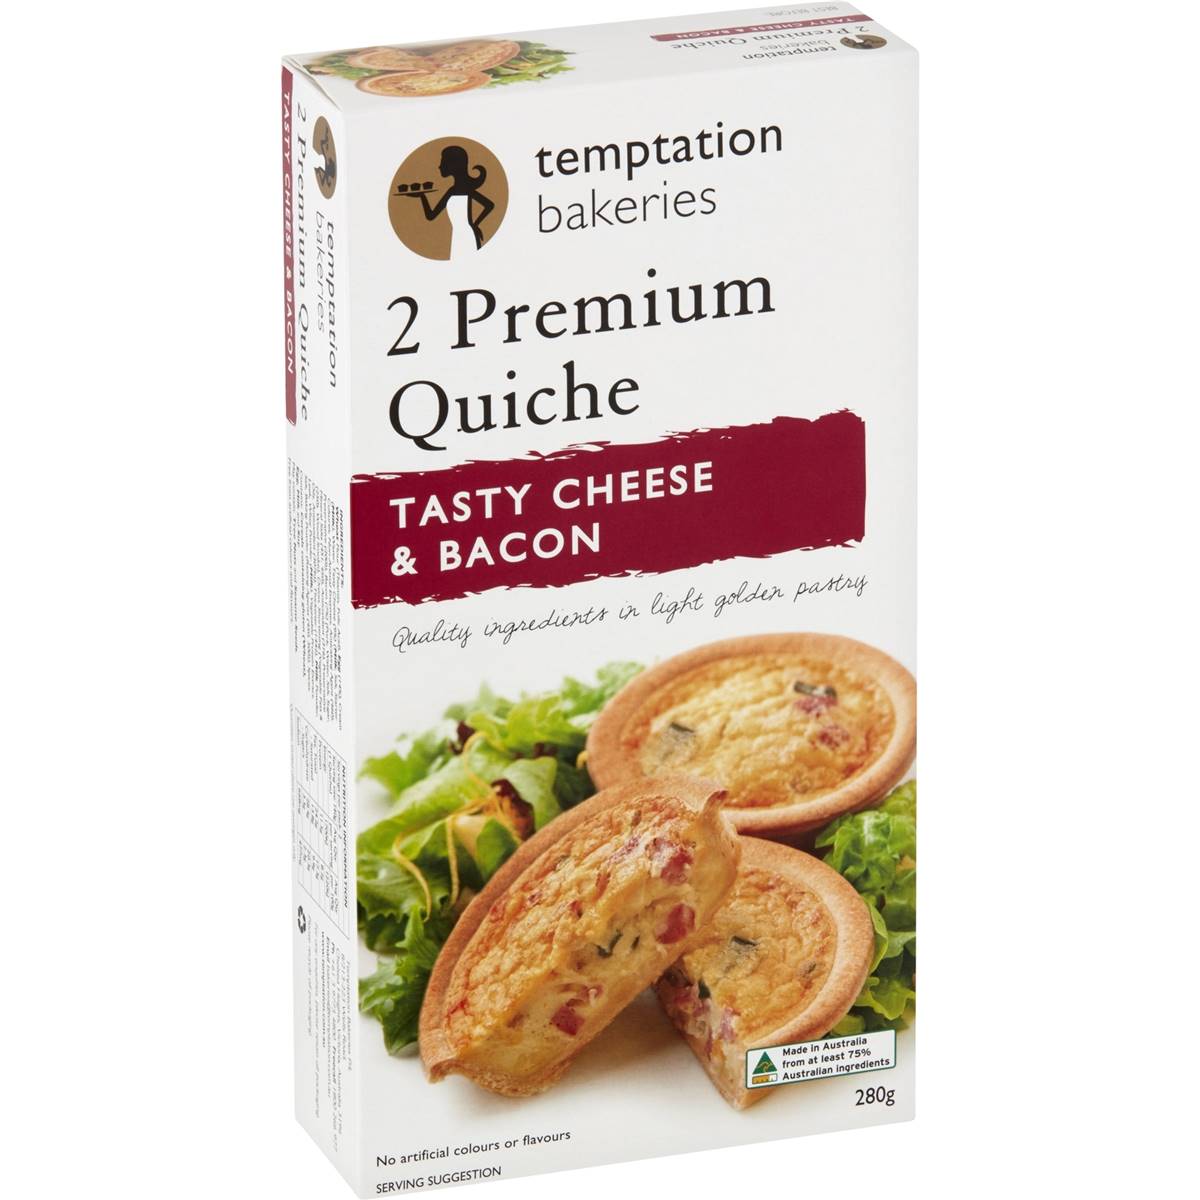 Calories in Temptation Bakeries Quiche Tasty Cheese & Bacon